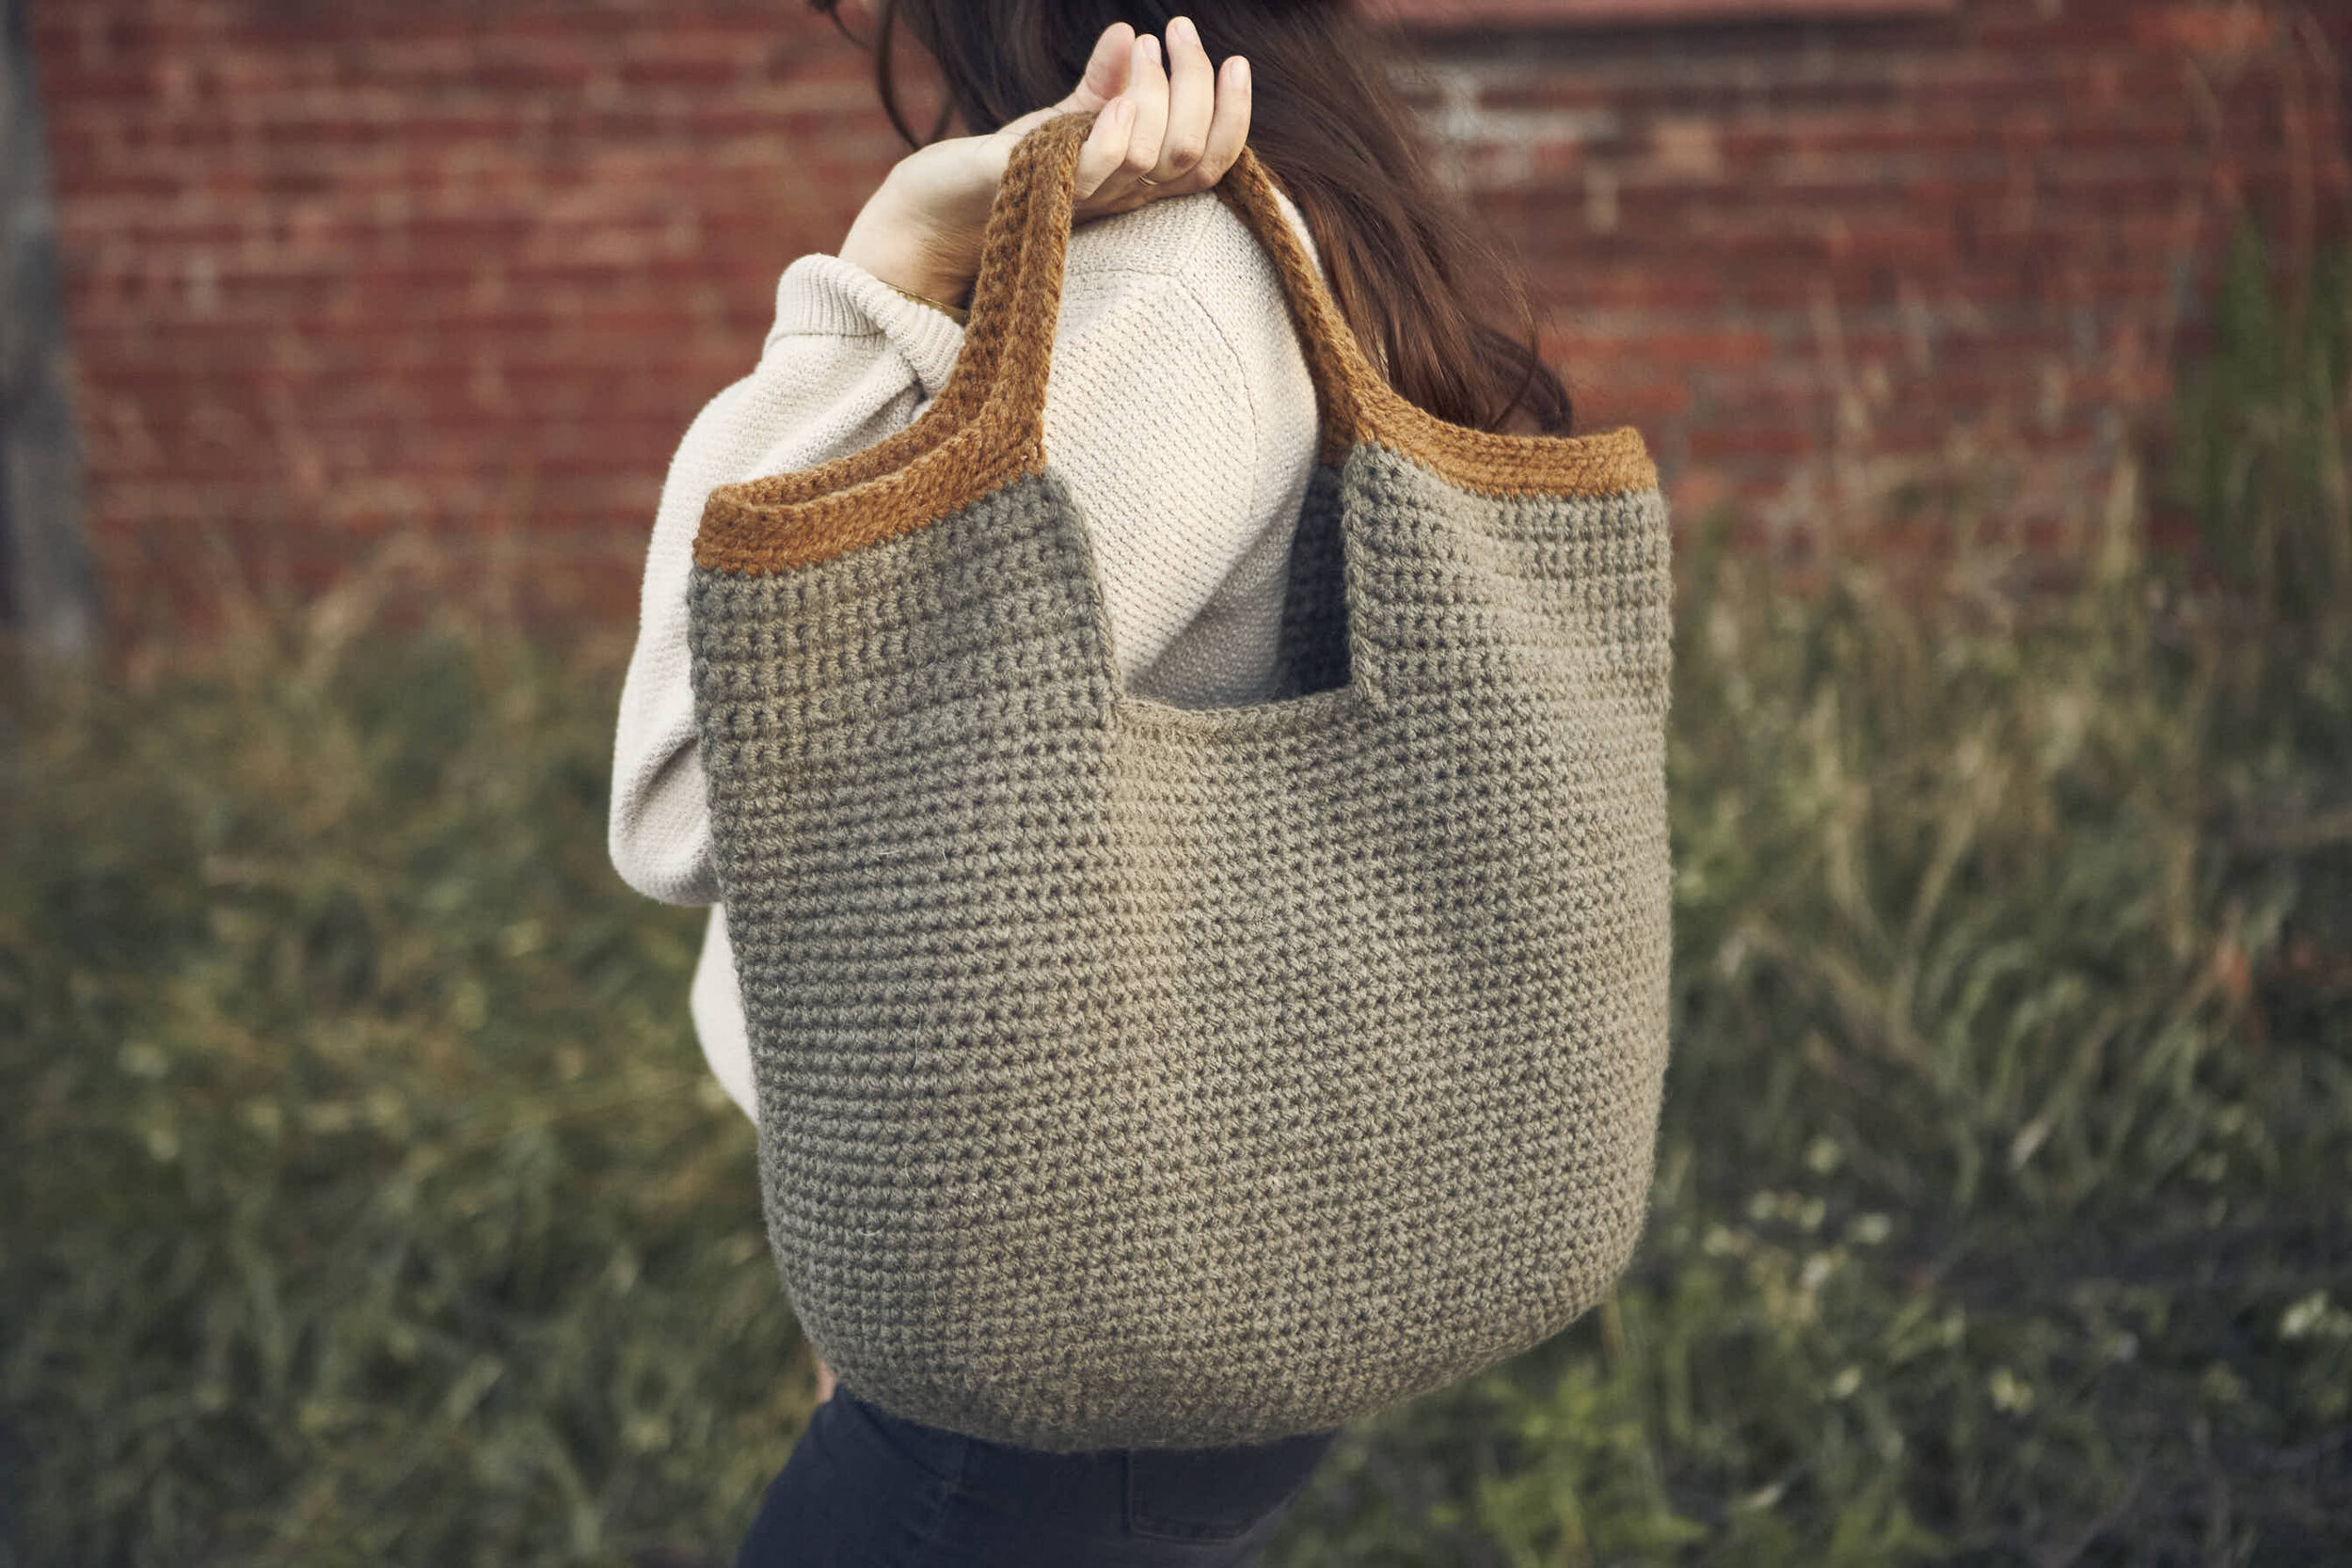 Weekend Makes: Crocheted Bags: 25 Quick and Easy Projects to Make